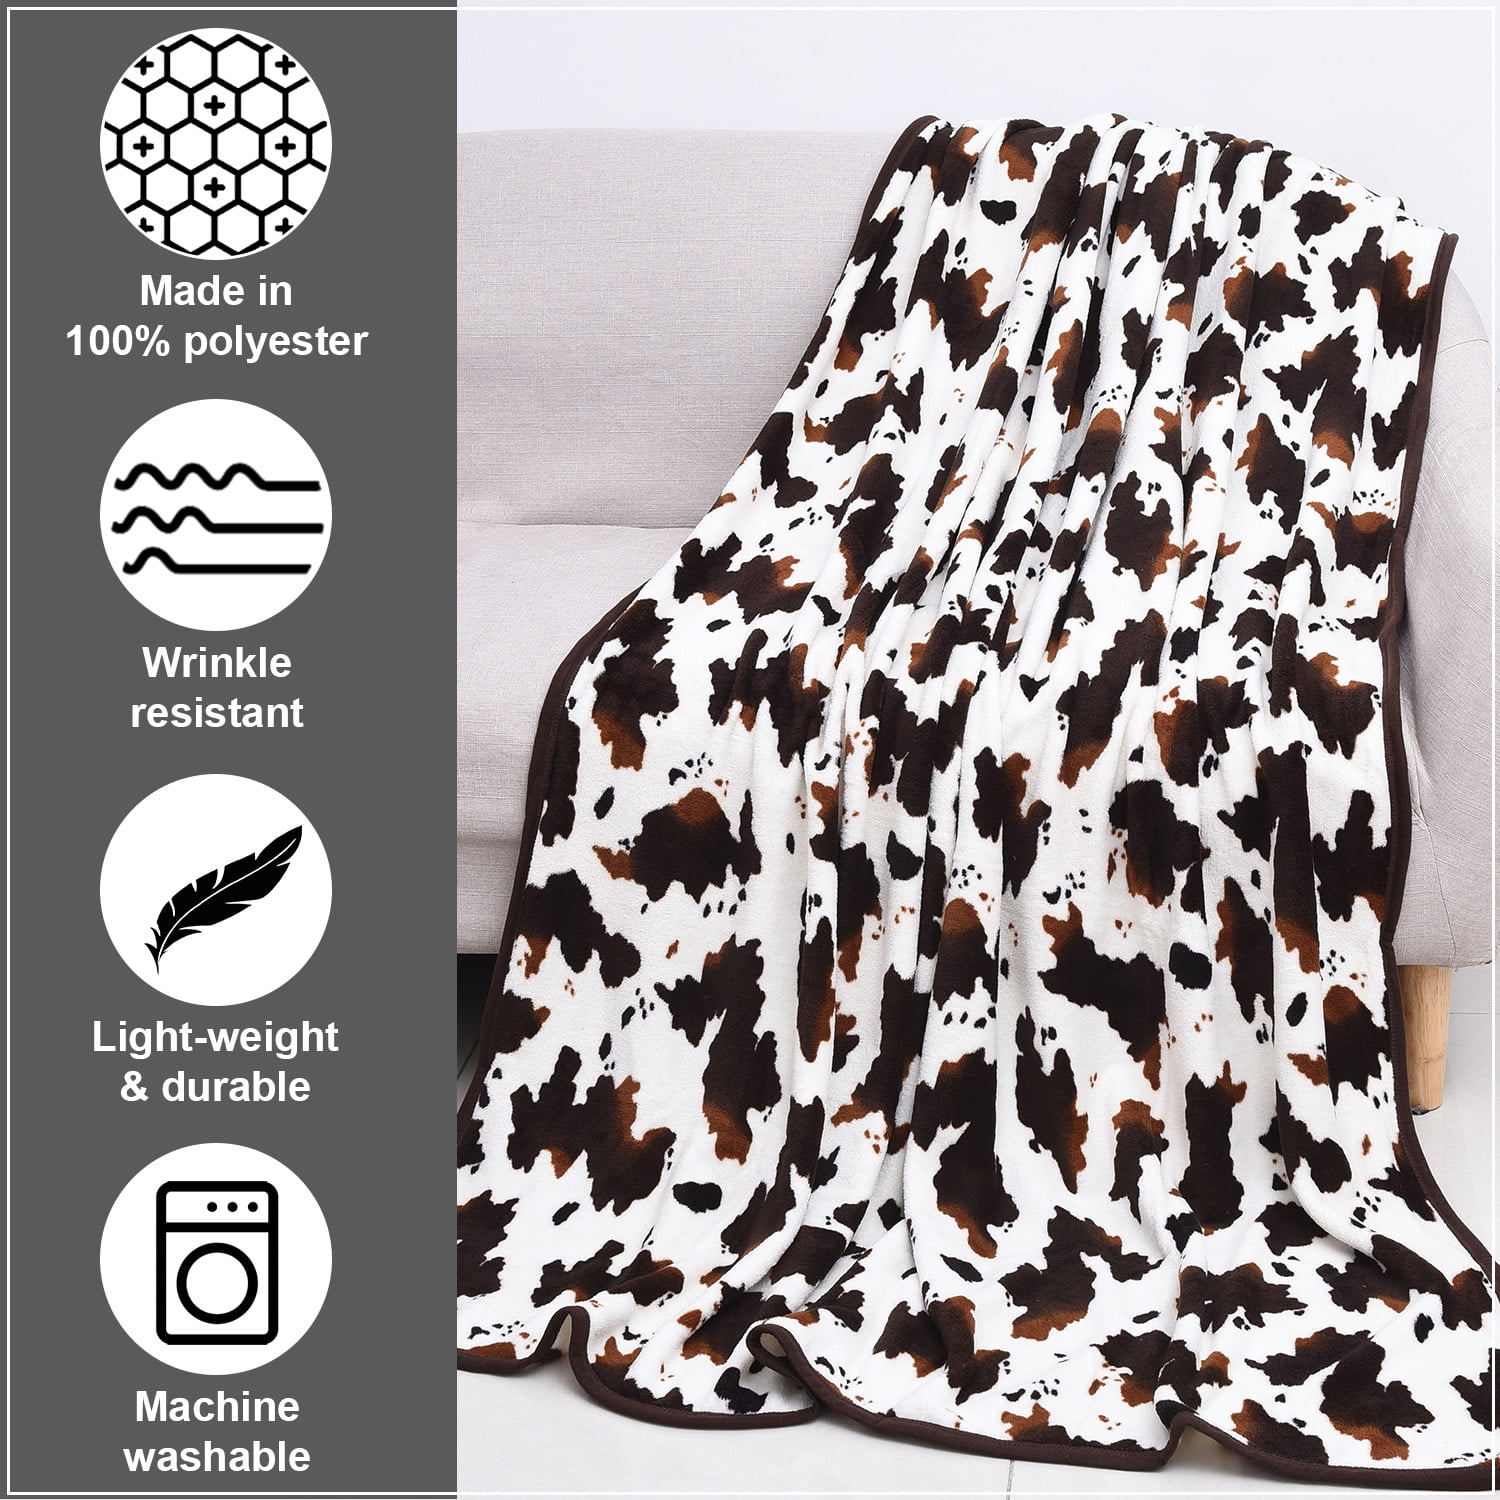 60x50-Throw Blanket Cute Floral Animal Pattern Printed Lightweight Warm Bed Blanket Microfiber Fuzzy Blanket for Sofa Bed Couch Living Room All Seasons